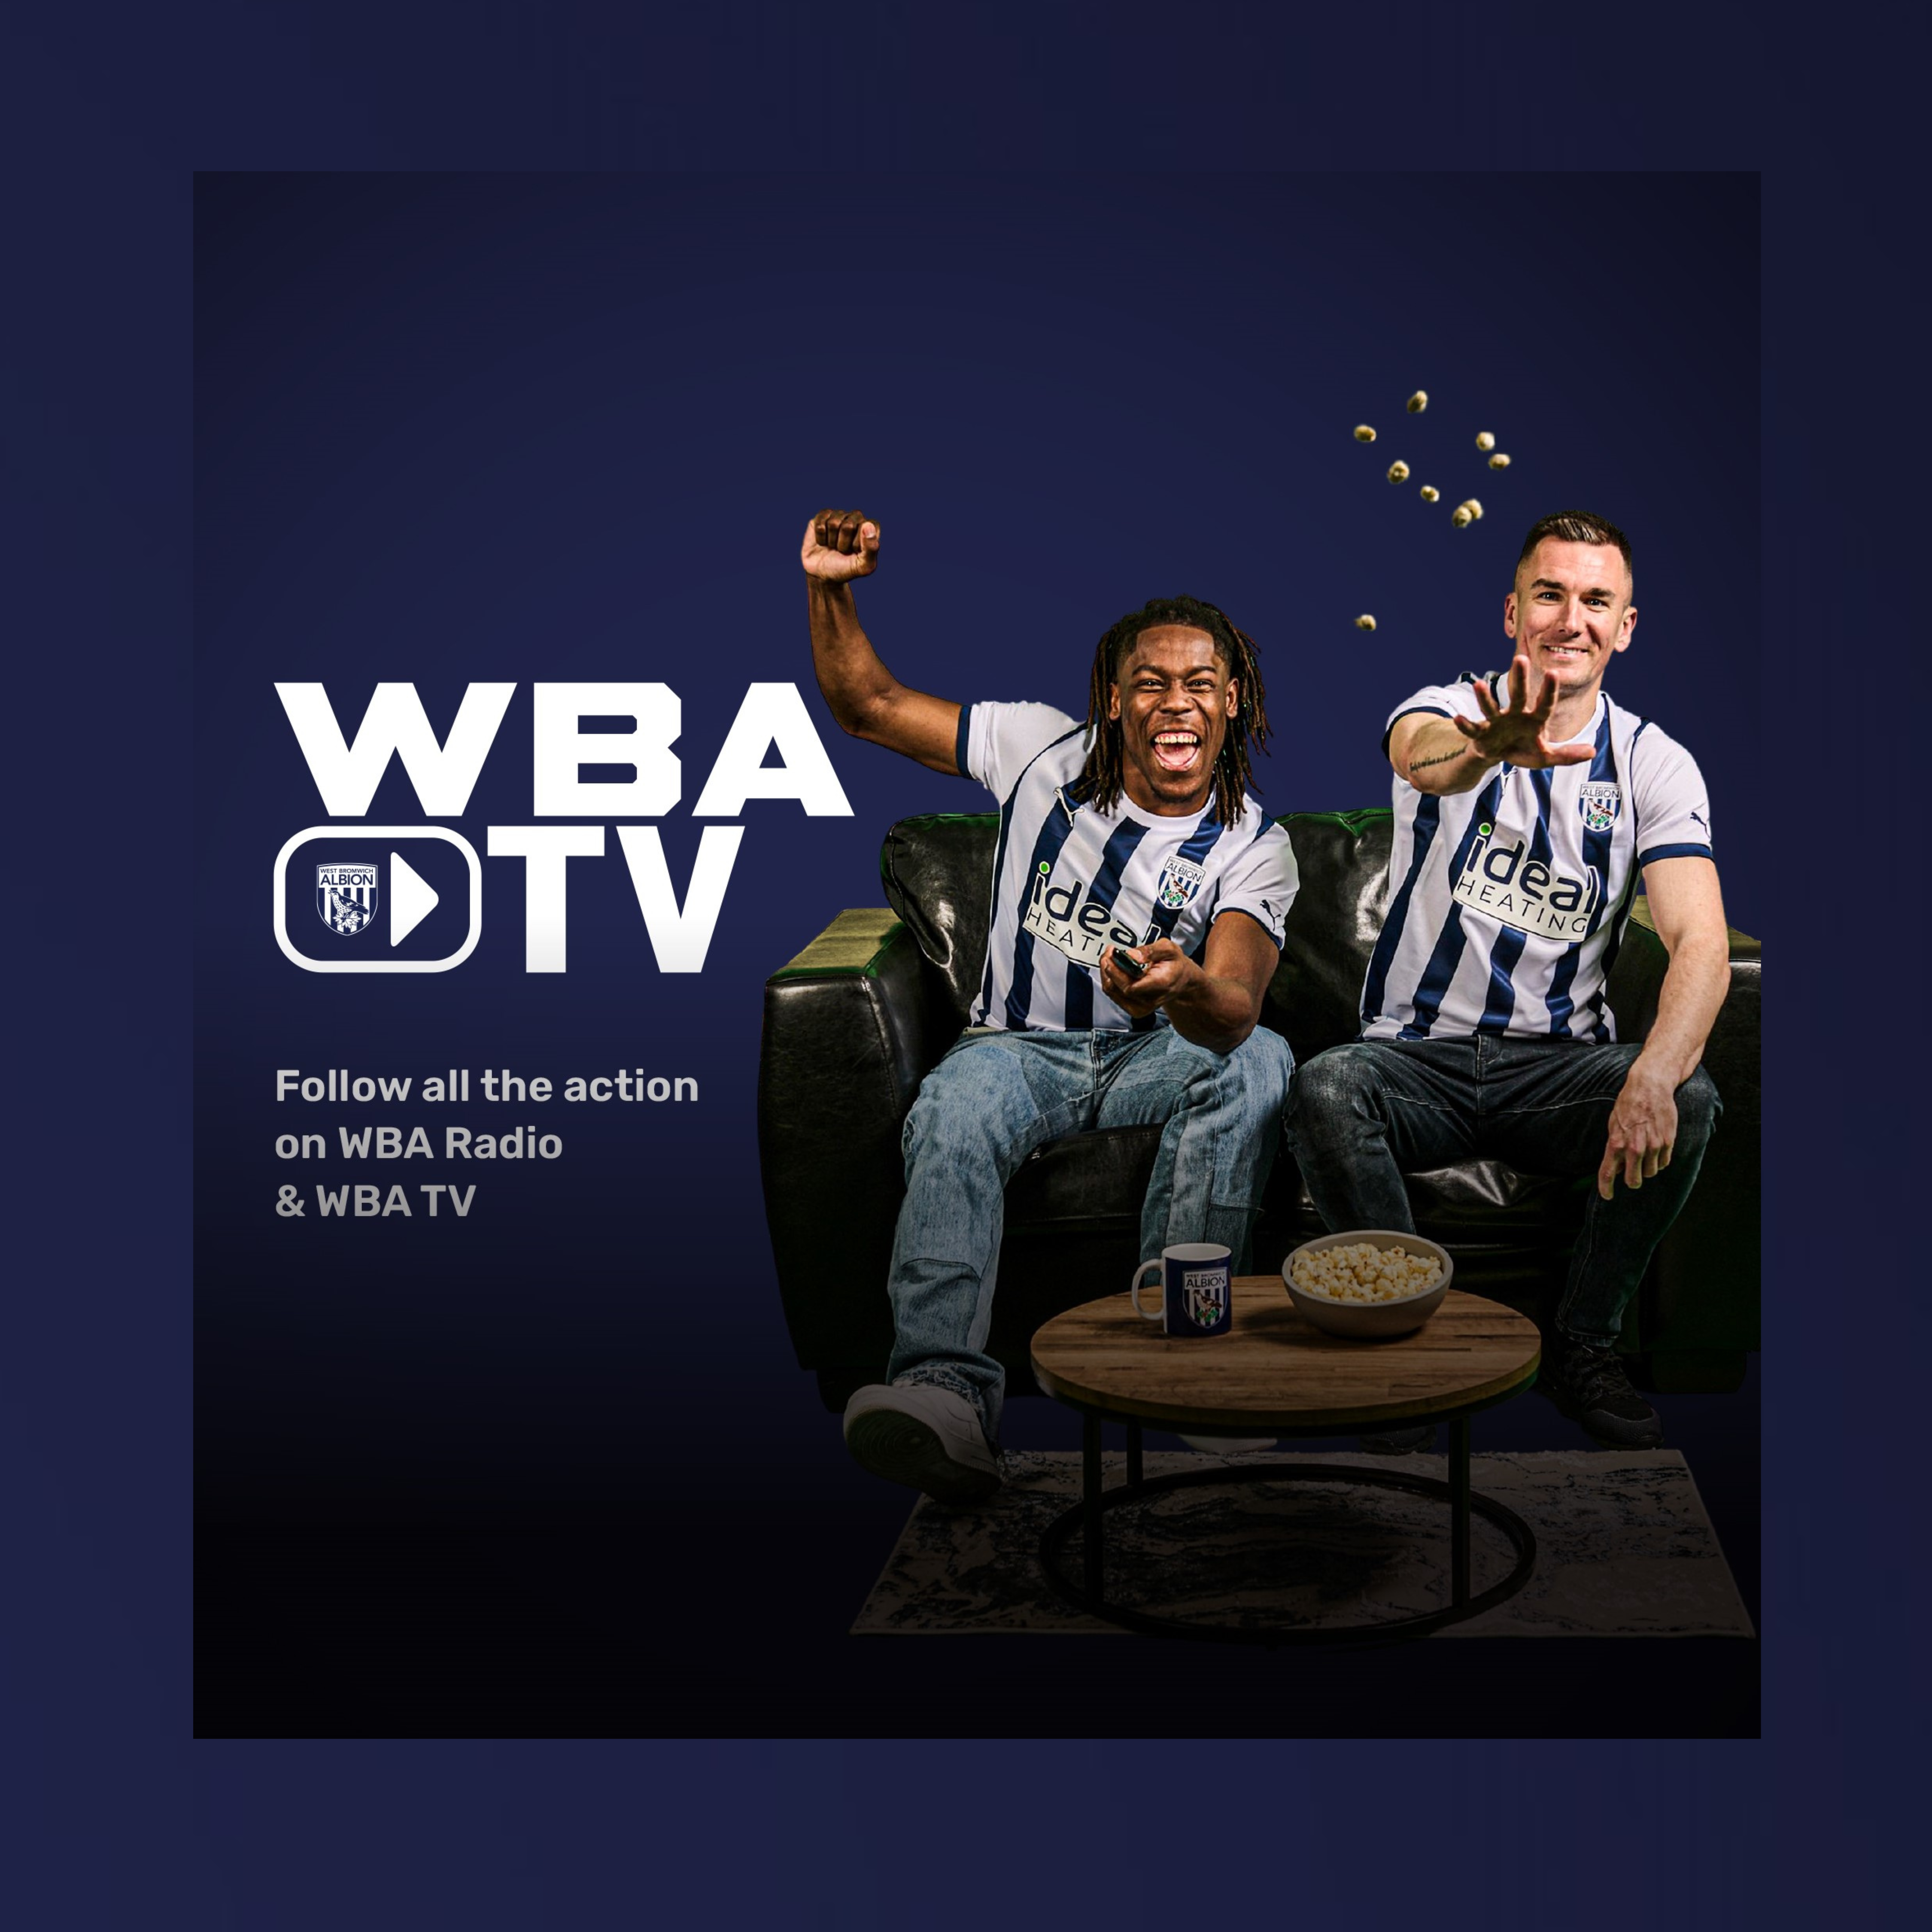 WBA TV Matchday Information Graphic featuring Brandon Thomas-Asante cheering and Jed Wallace throwing popcorn.